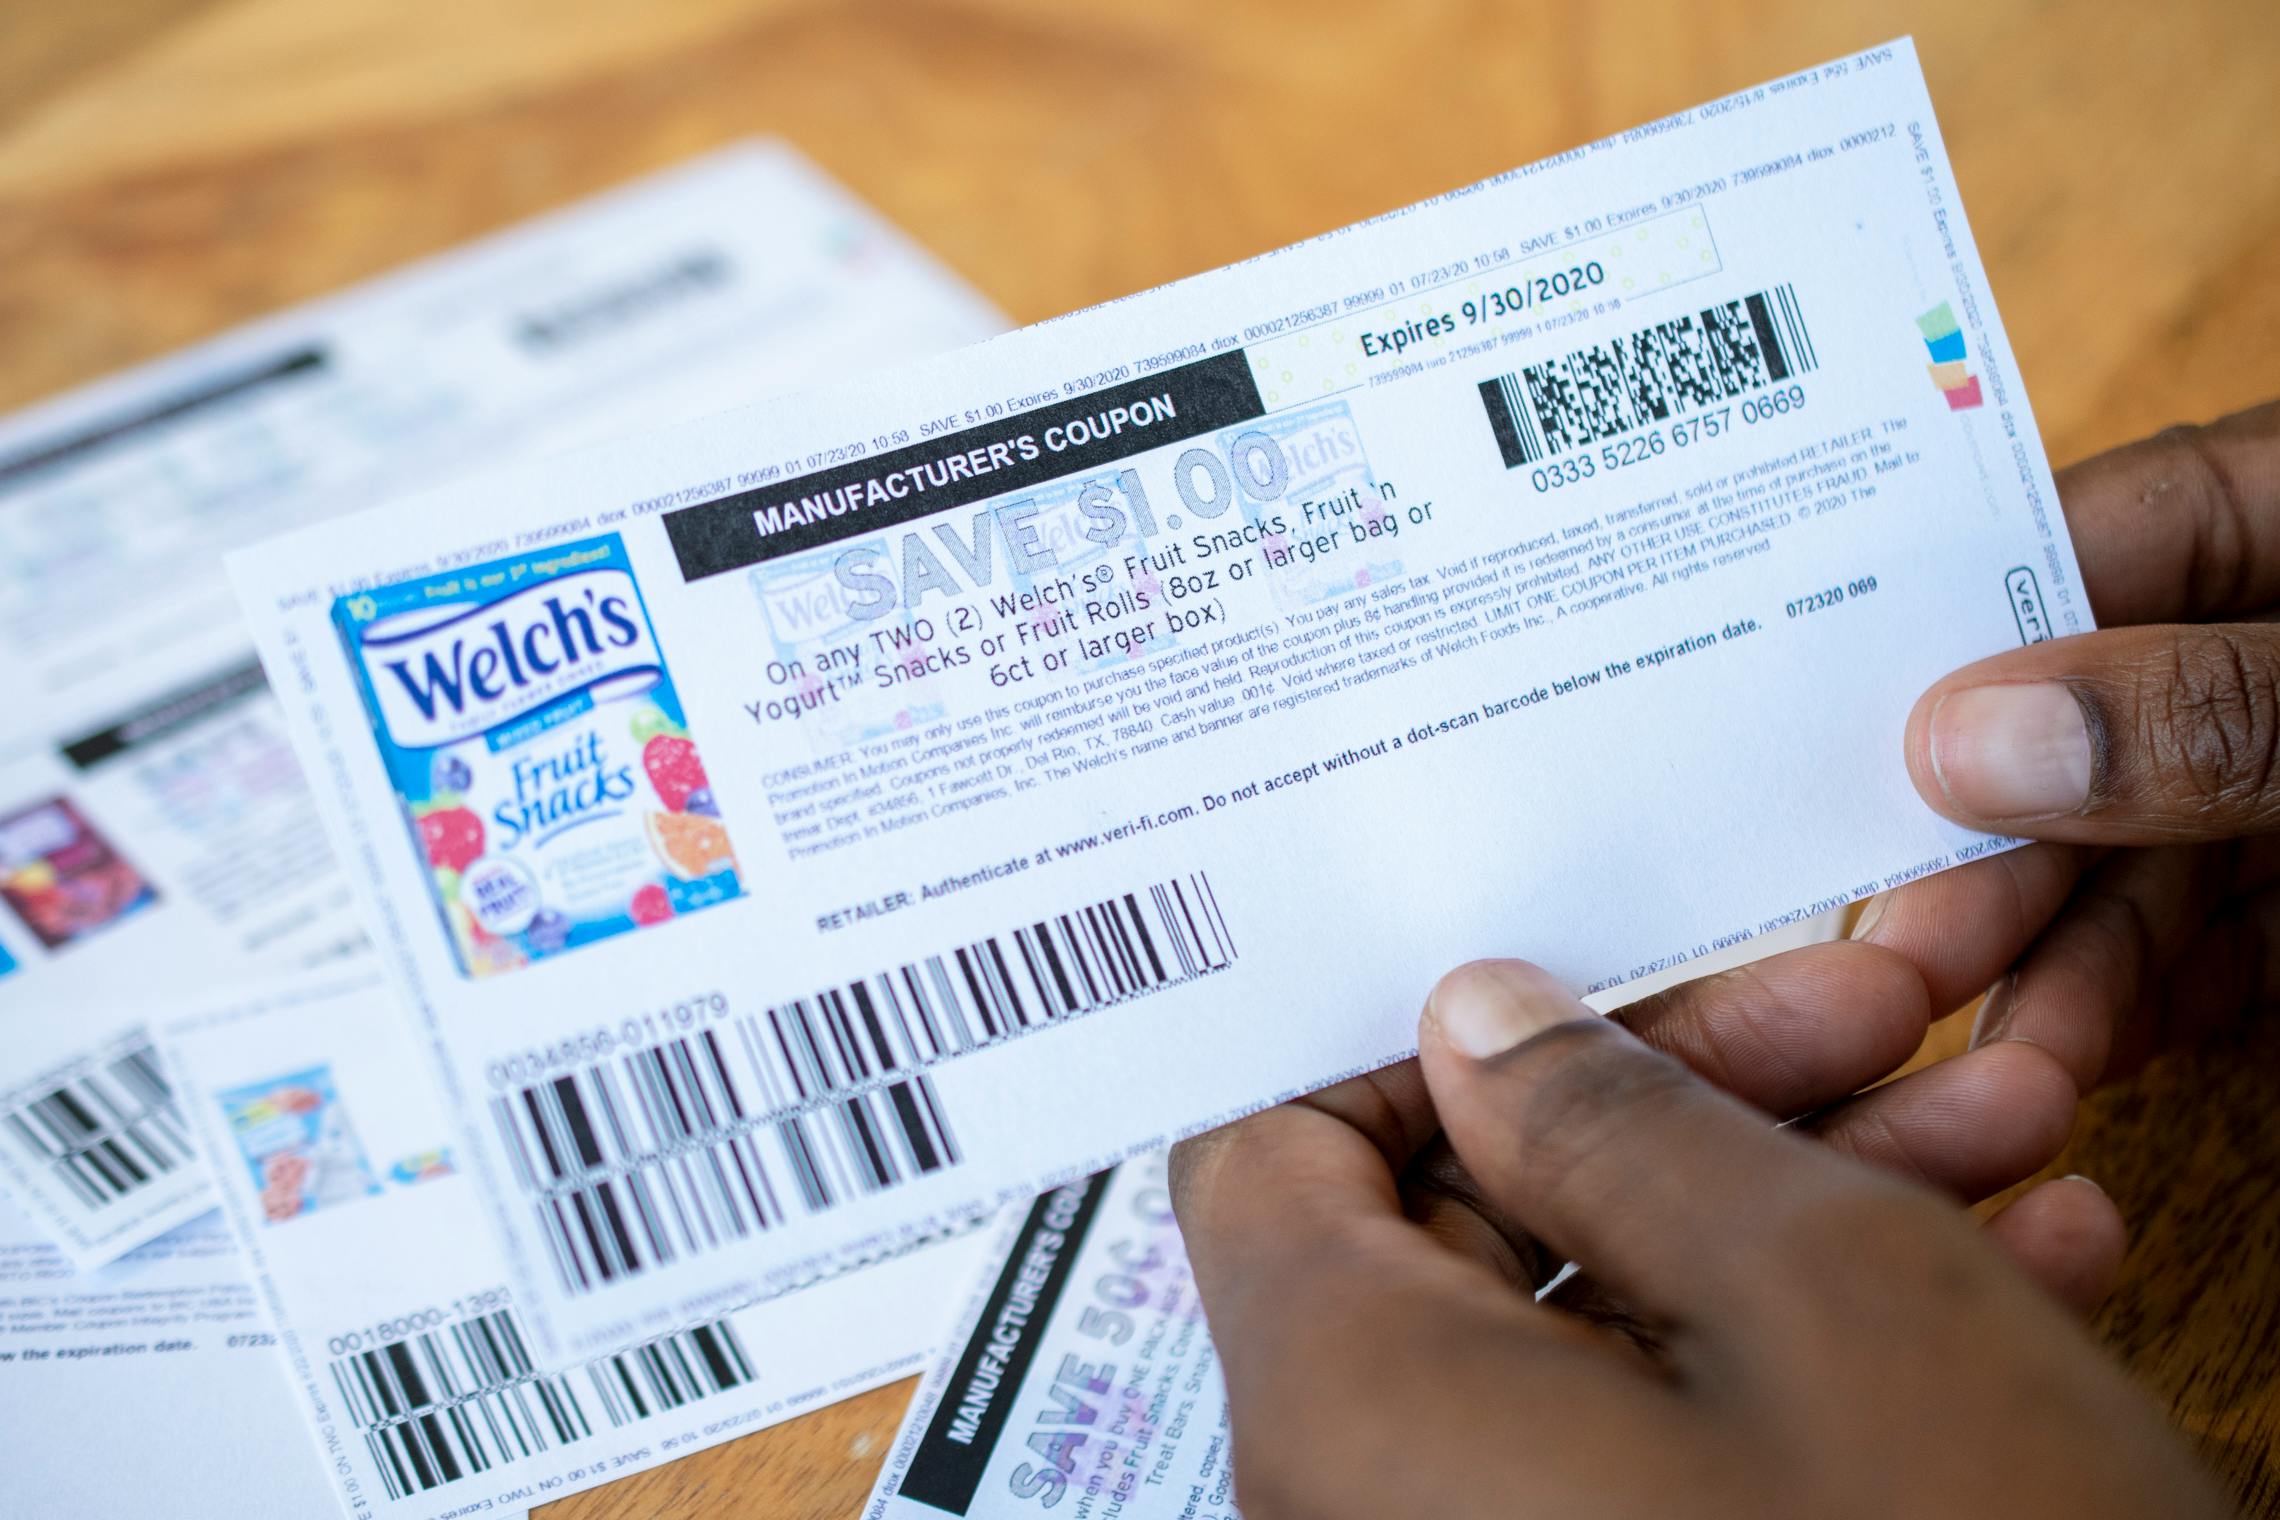 Get Free Printable Coupons In A Few Easy Steps The Krazy Coupon Lady